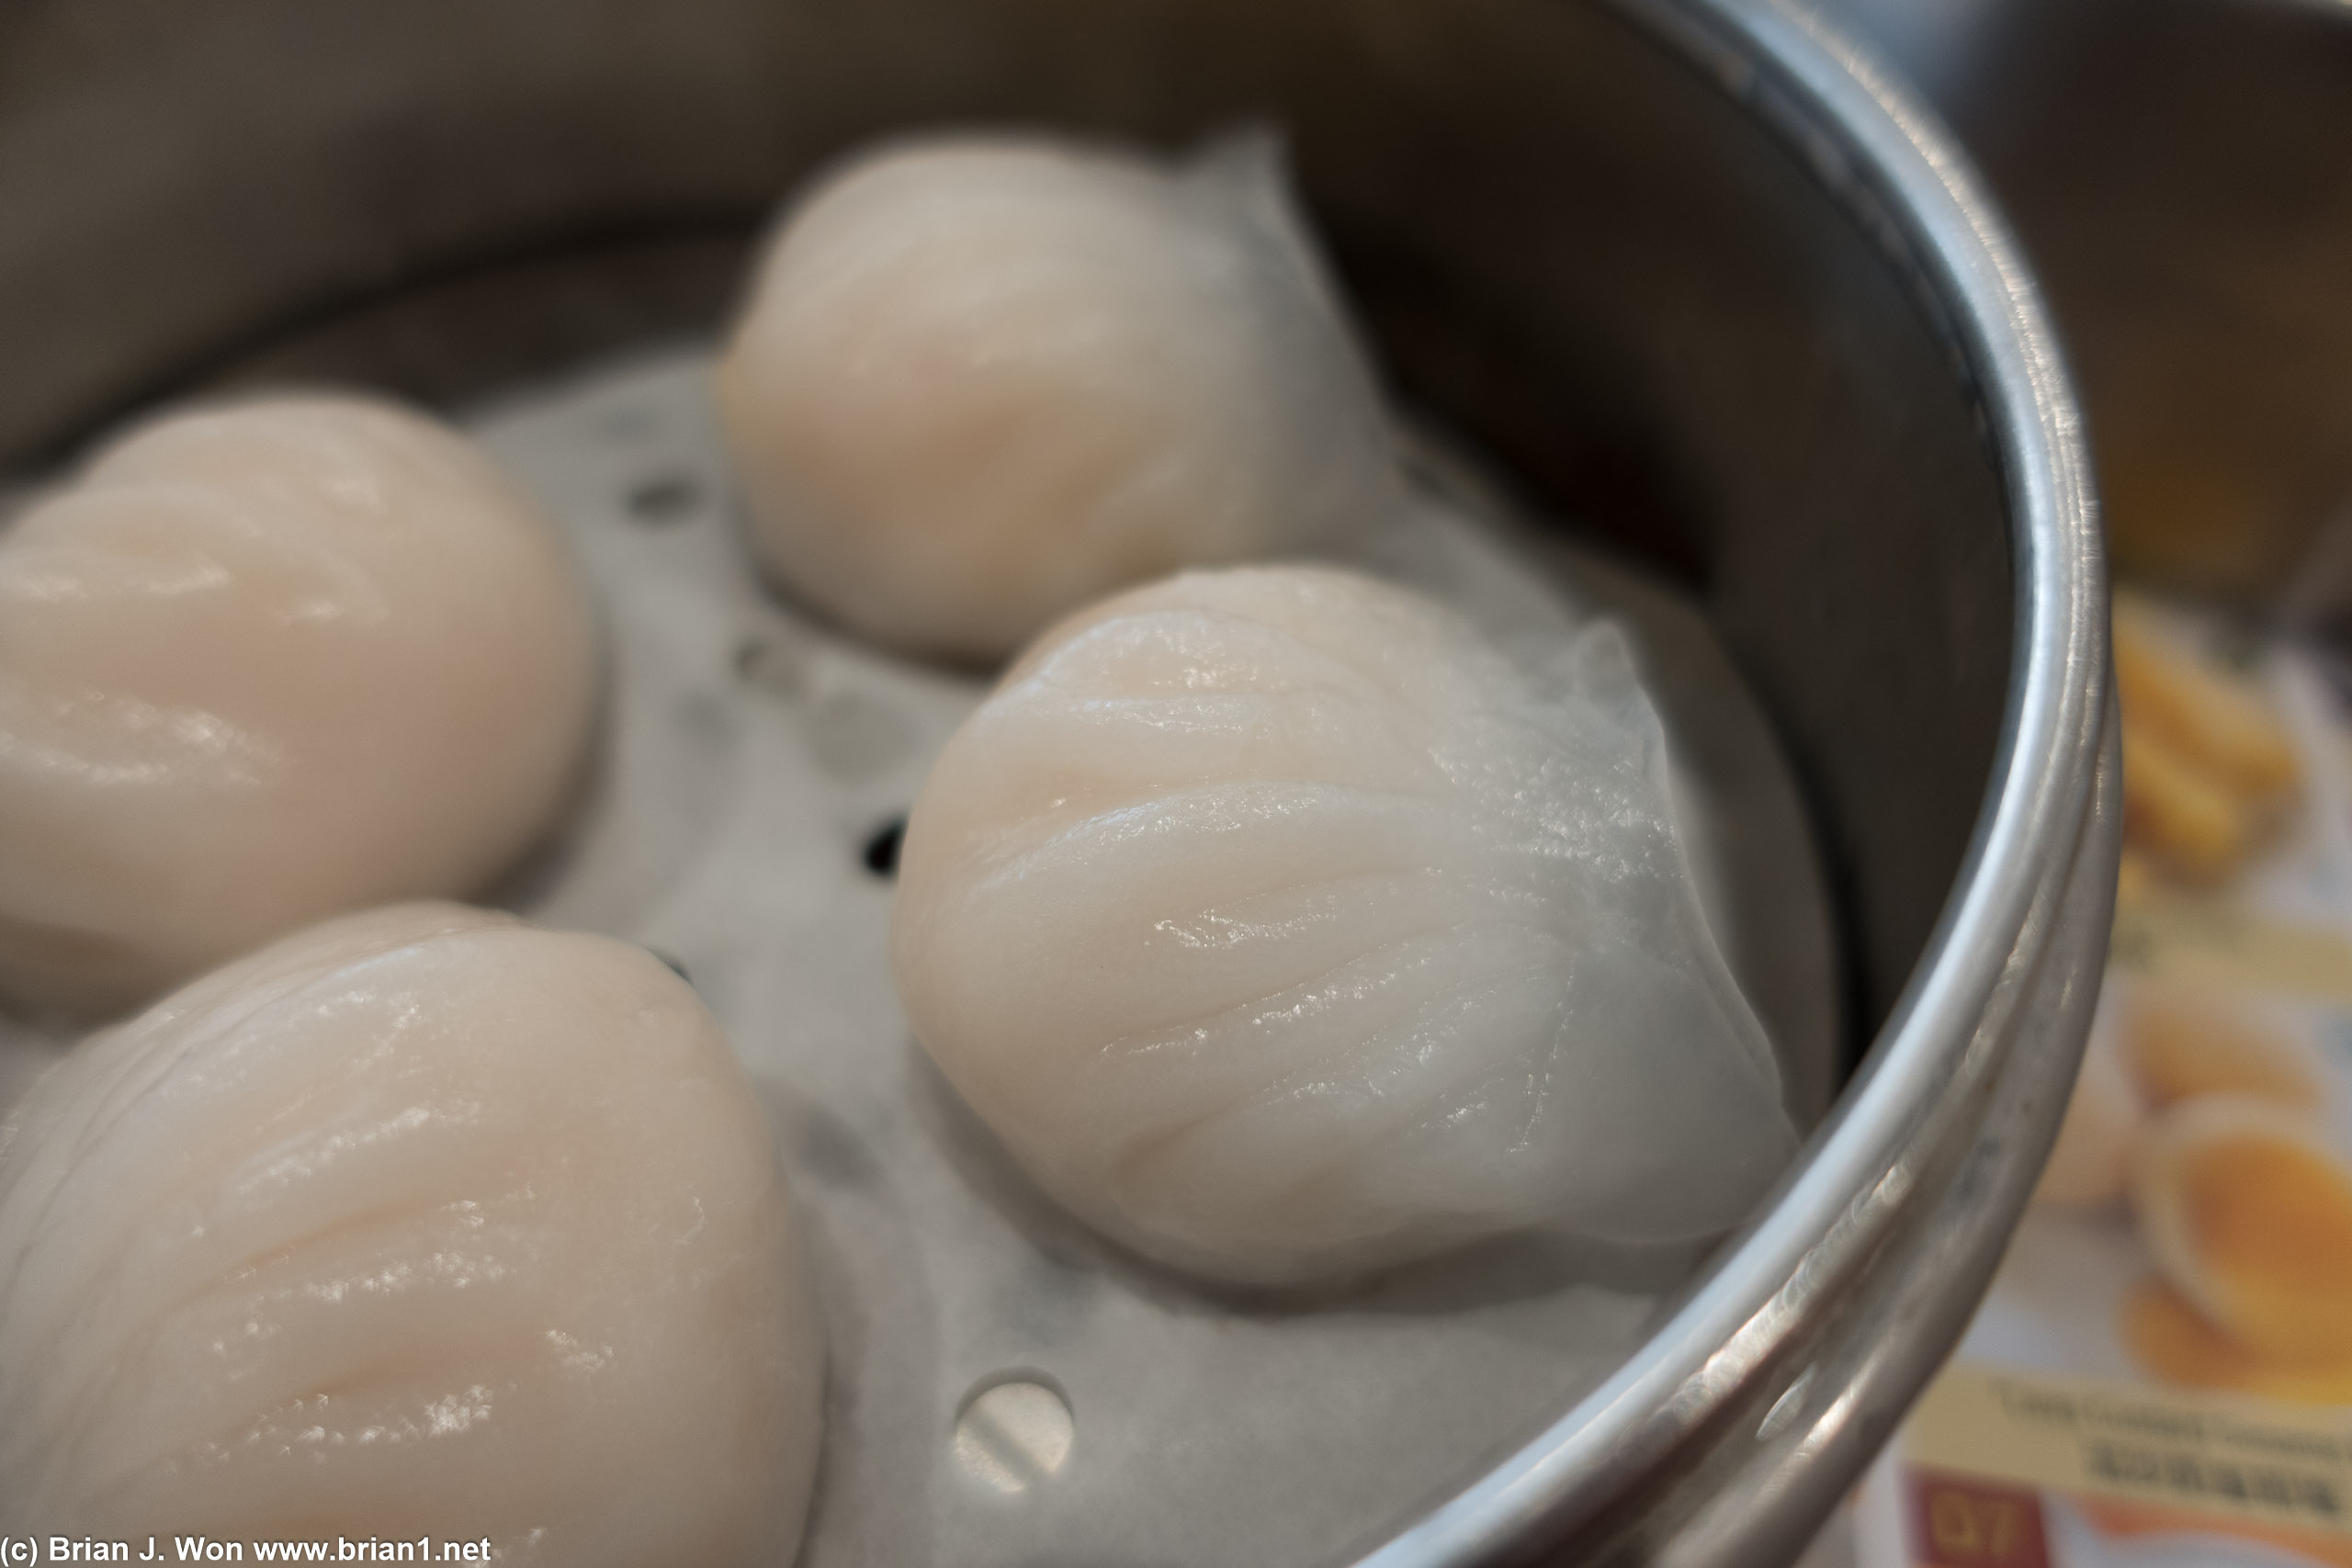 Har gow were the one thing done close enough to right. Skins still not quite translucent enough.